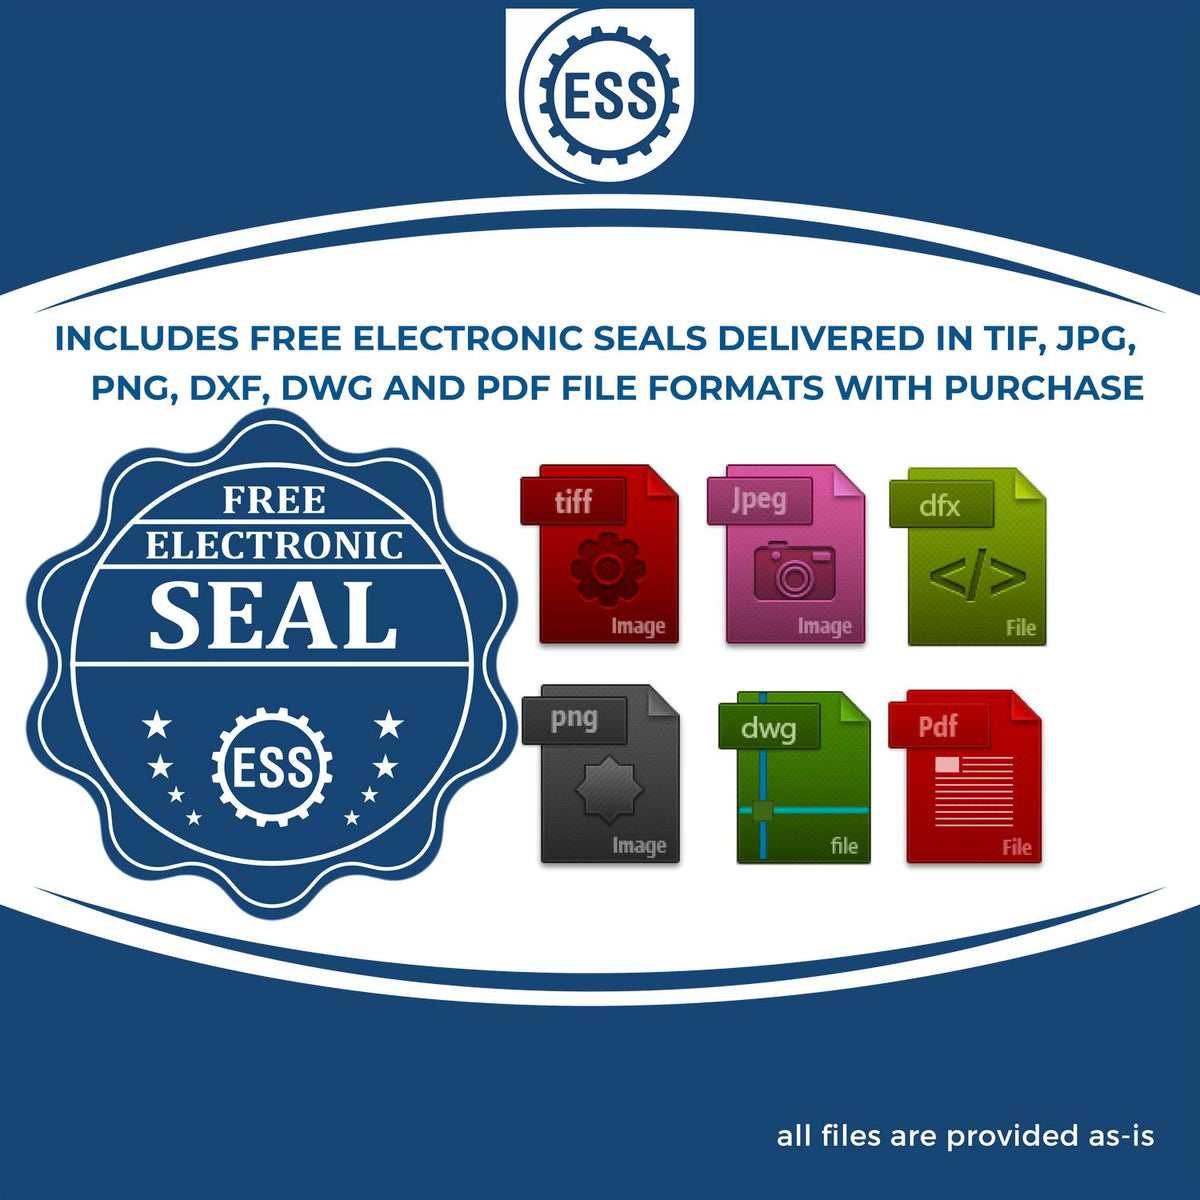 An infographic for the free electronic seal for the Wooden Handle Connecticut State Seal Notary Public Stamp illustrating the different file type icons such as DXF, DWG, TIF, JPG and PNG.